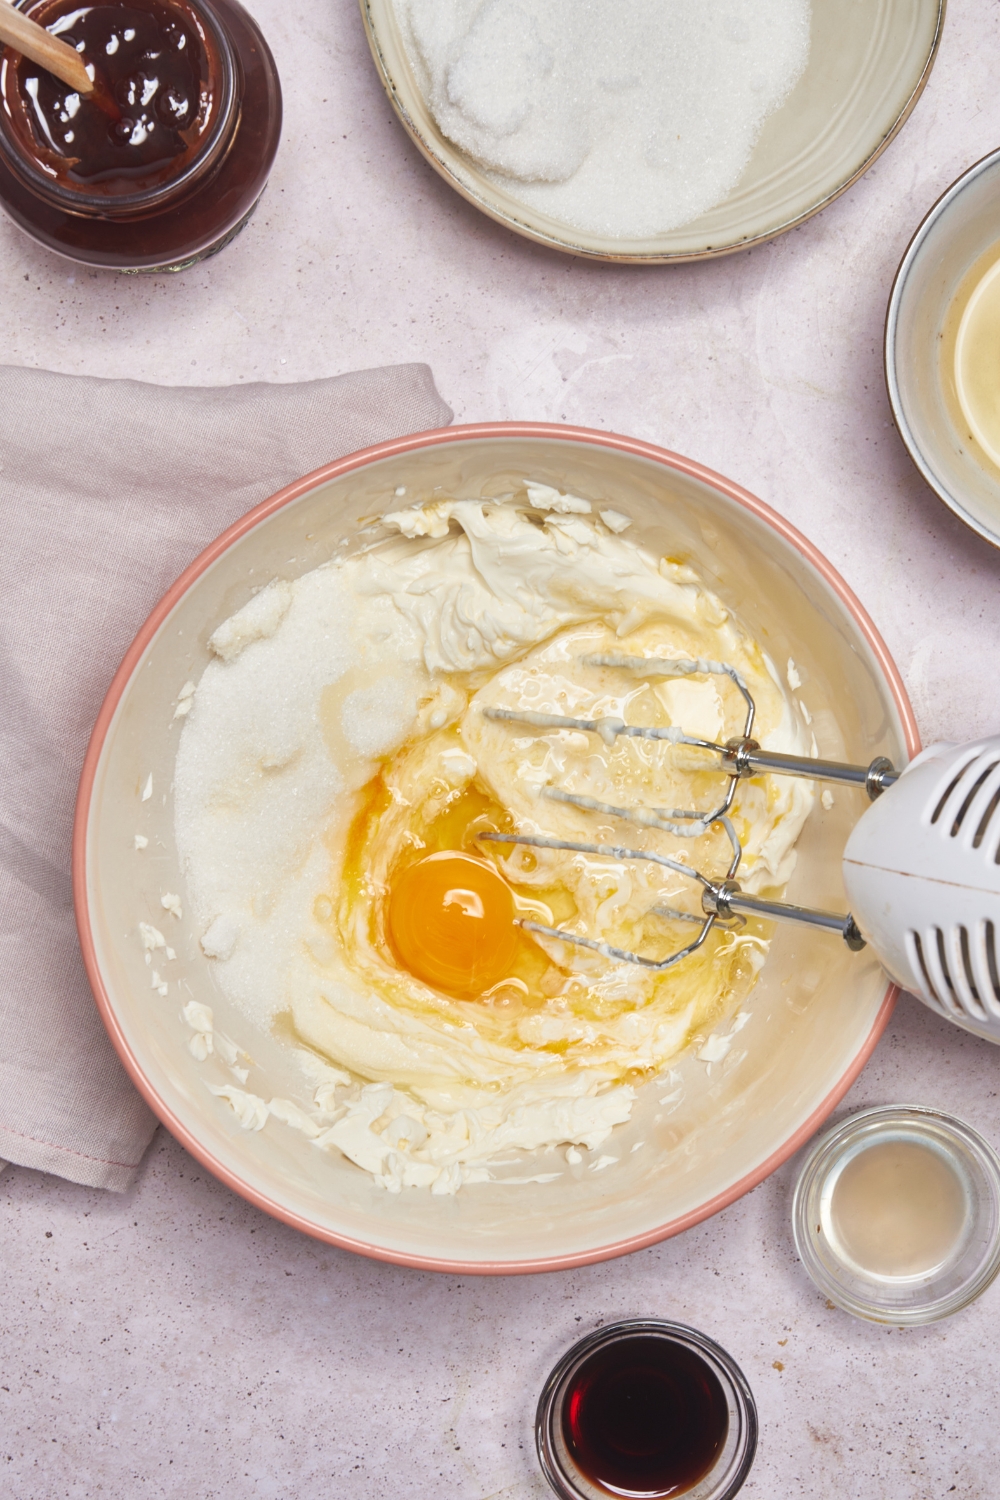 A mixing bowl with the cream cheese mixture, an egg has just been added to it and the electric beater is mixing.